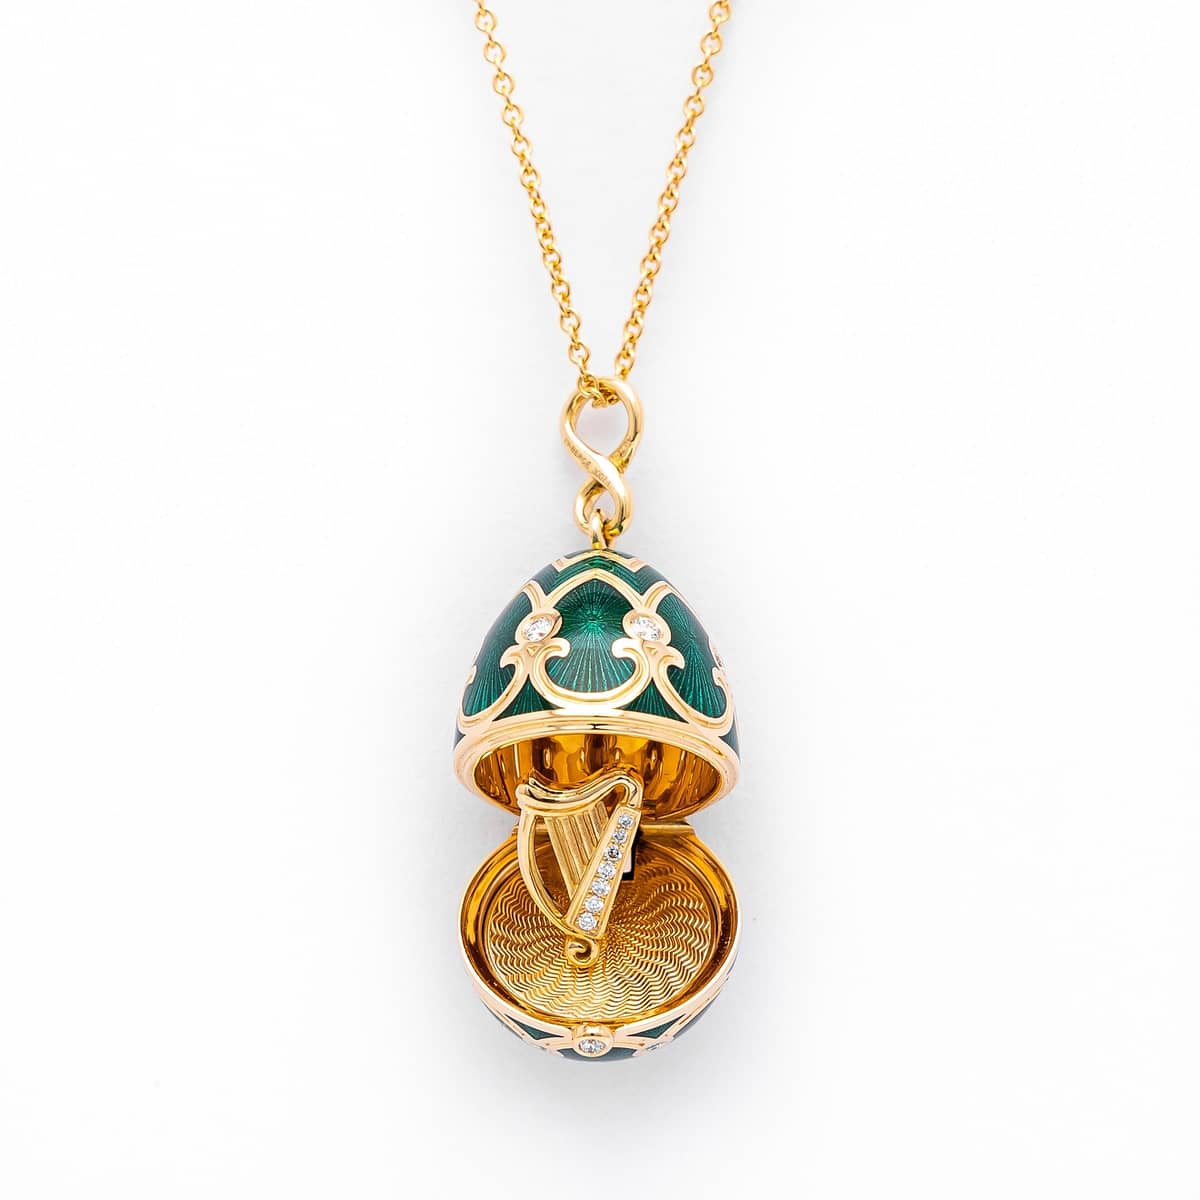 18k yellow gold Faberge Palais Tsarskoye Egg Harp Surprise locket.
The locket features a green guilloche ennamel egg decorated with diamonds. Concealed within the egg locket is a yellow gold harp set with round brilliant cut diamonds. The locket is suspended from an 18k yellow gold chain.
Total diamond carat weight: 0.30ct